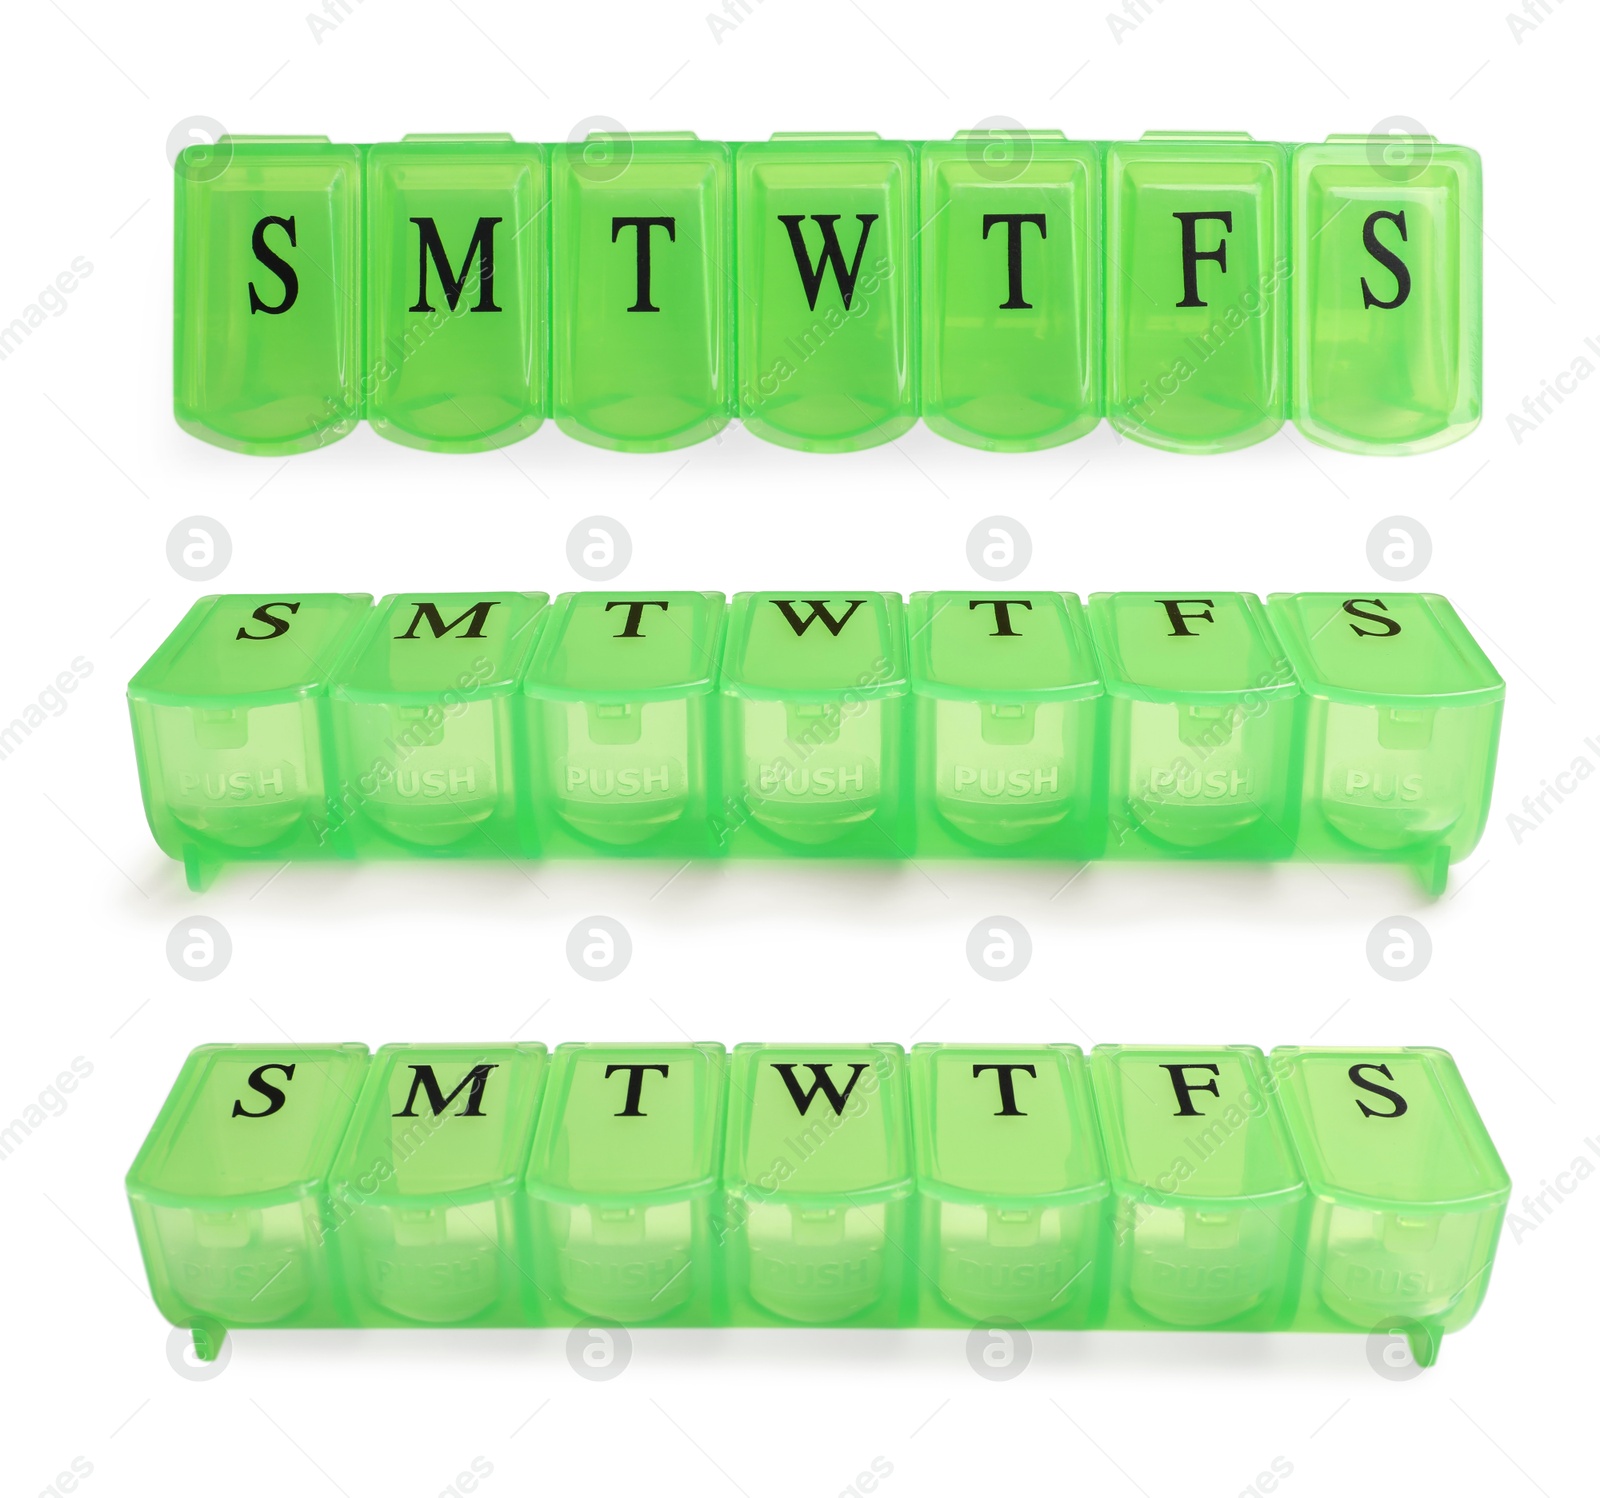 Image of Green pill organizer isolated on white, views from different angles